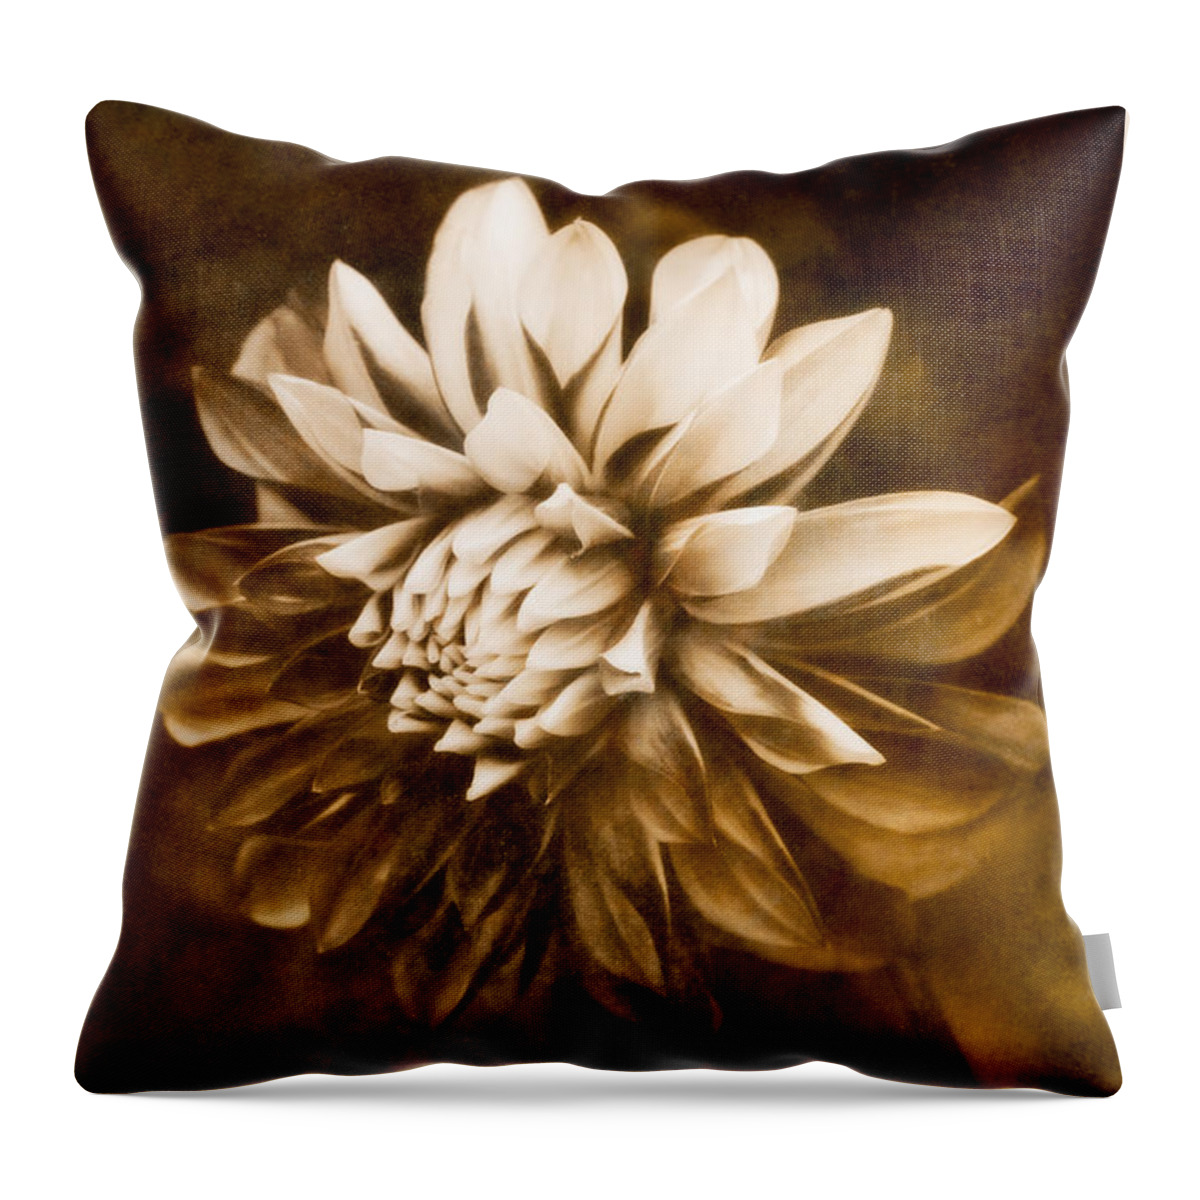 Abstract Throw Pillow featuring the photograph Vintage Dahlia by Venetta Archer